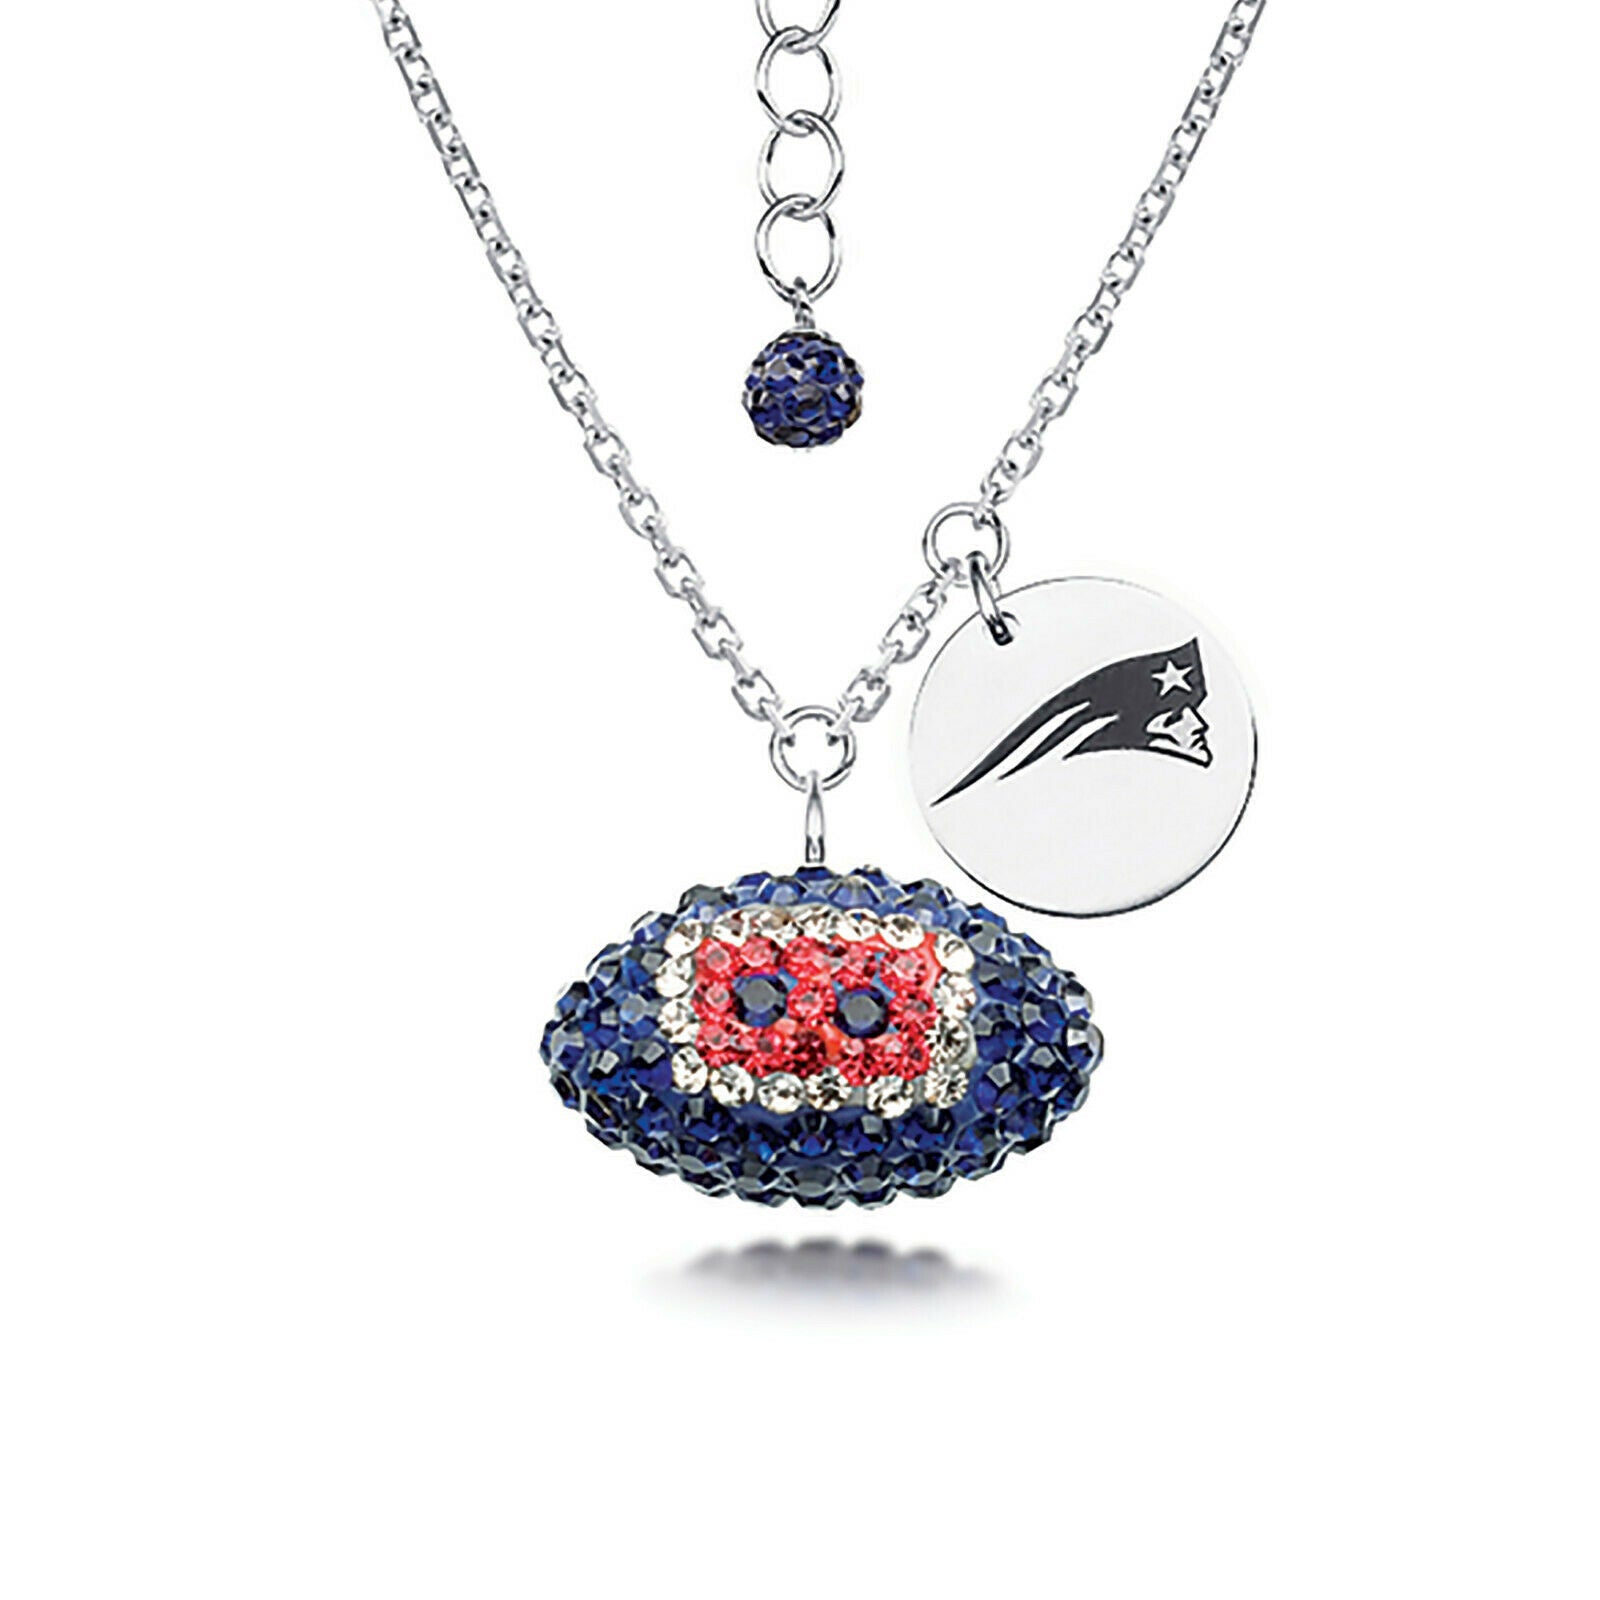 NFL New England Patriots Football Necklace Sterling Silver - Official Licensed